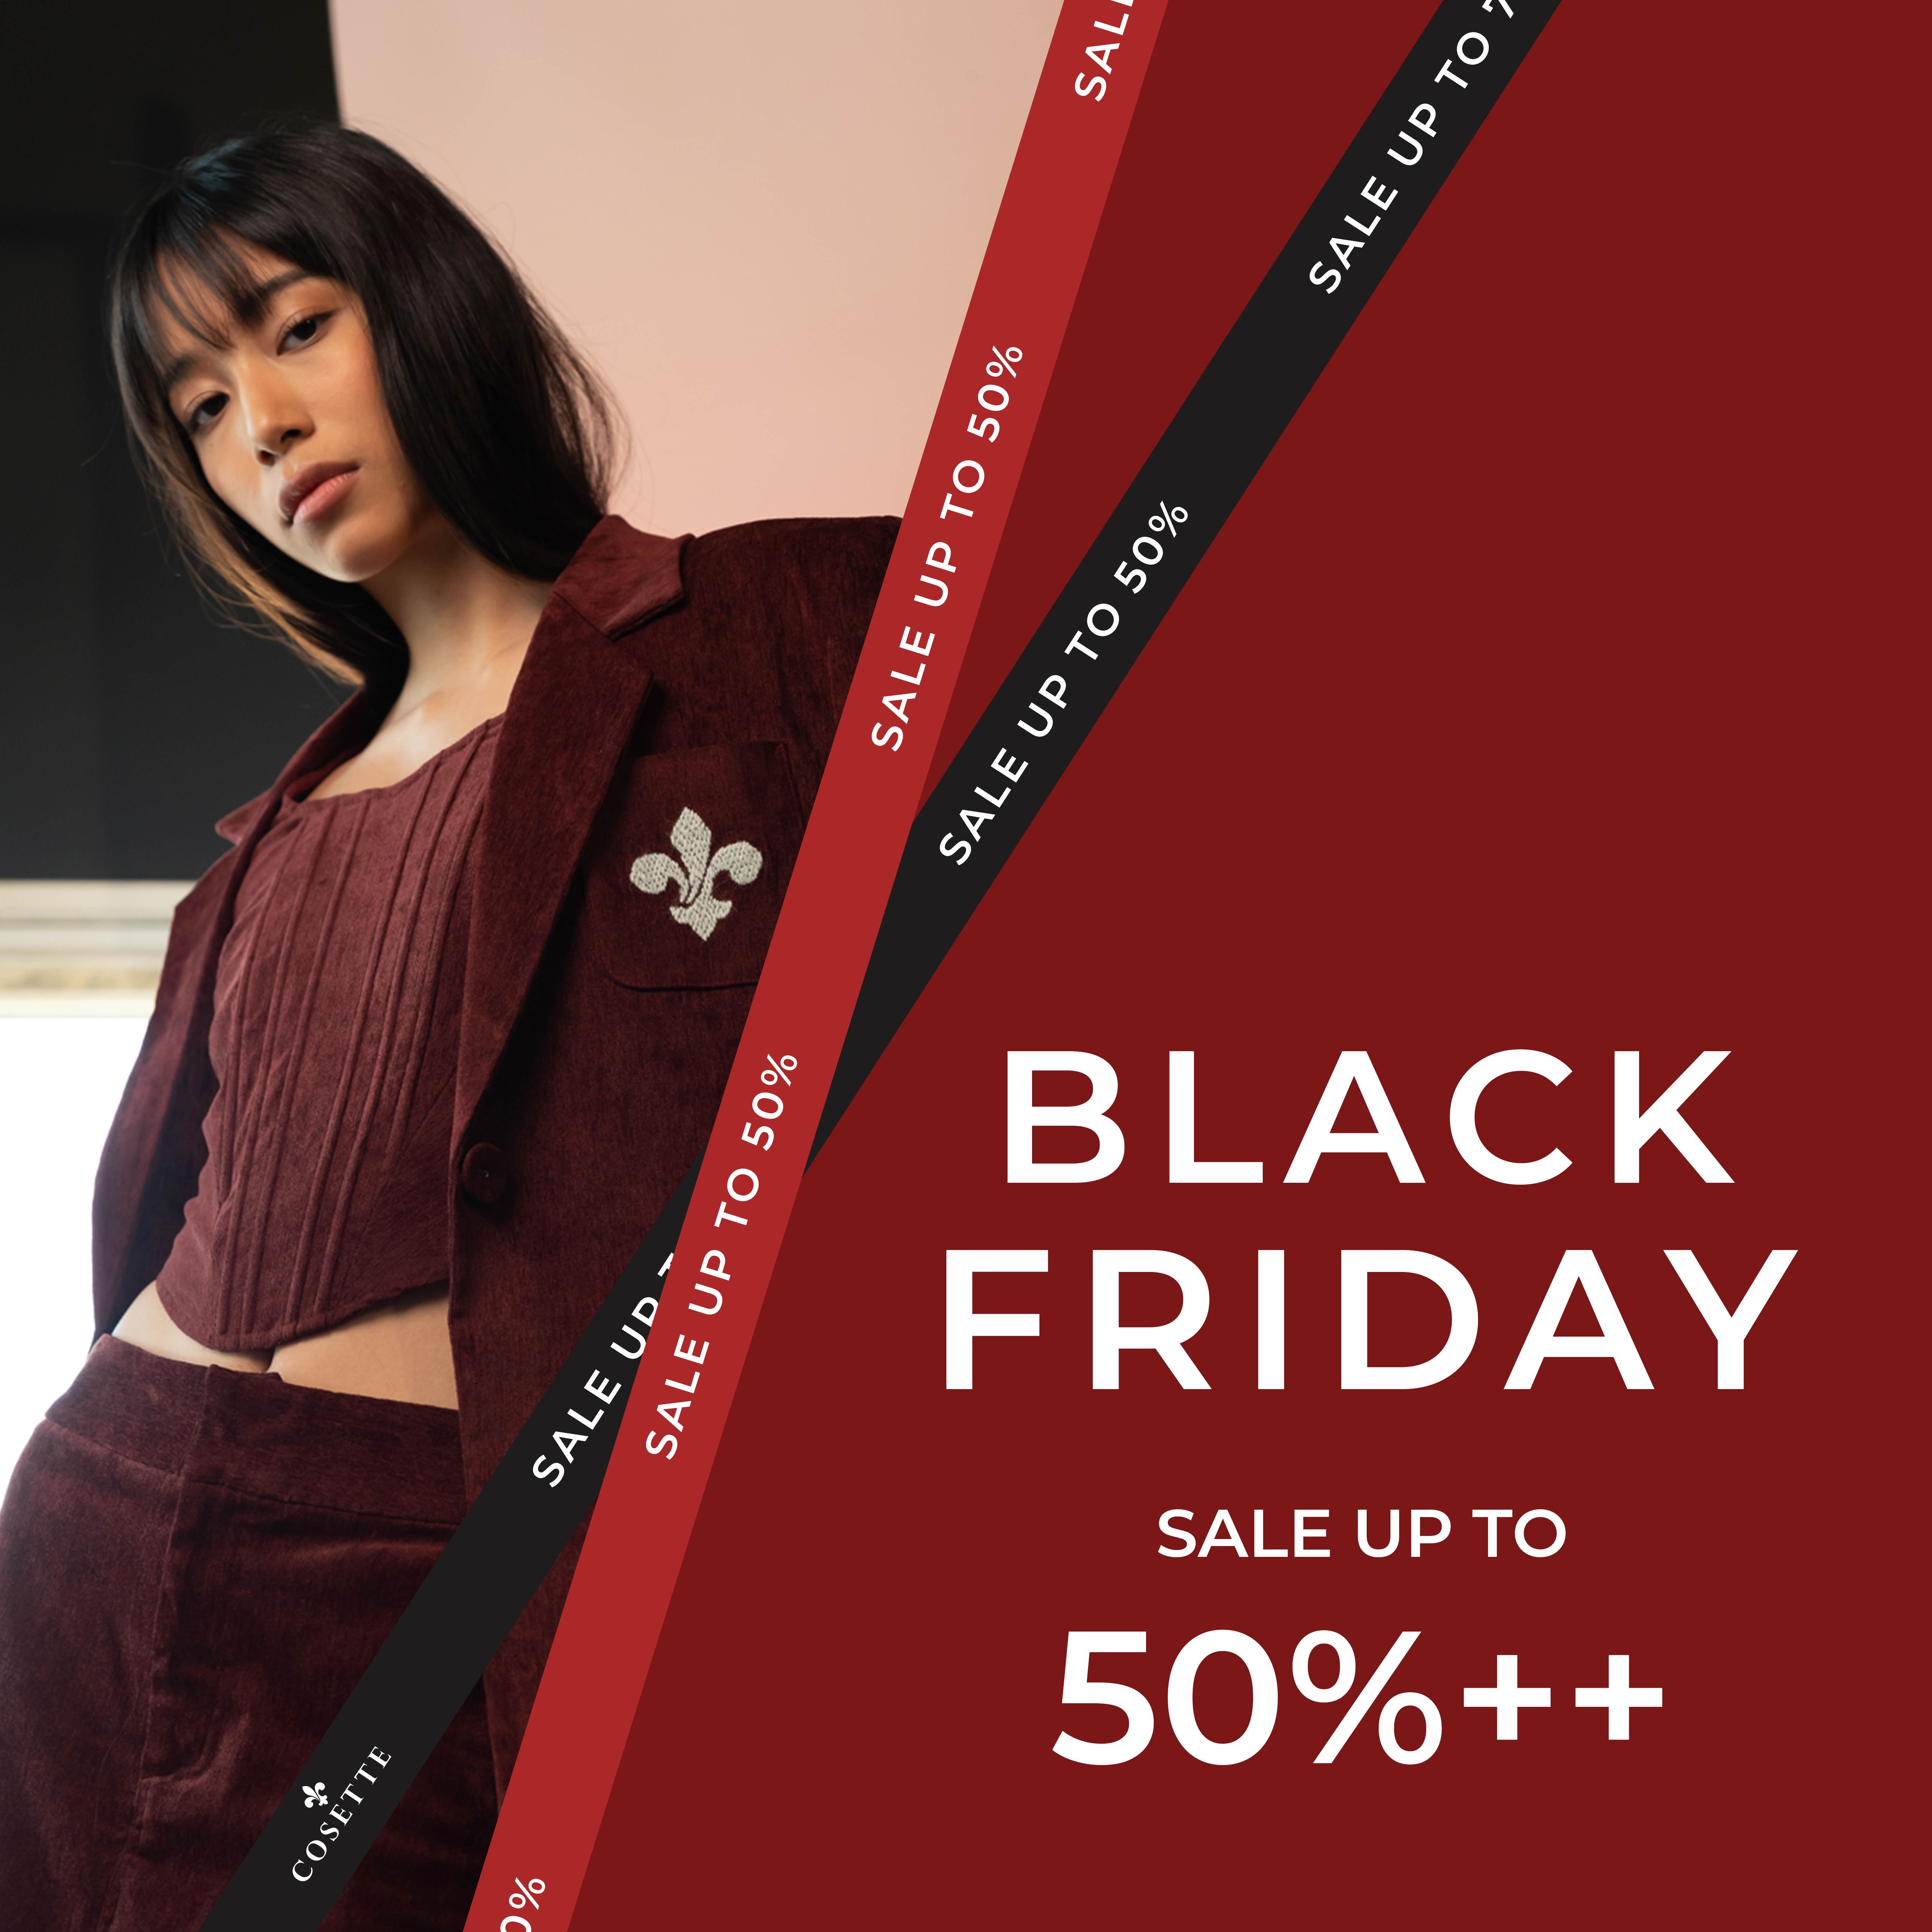 COSETTE - BLACK FRIDAY SALE UP TO 50%++